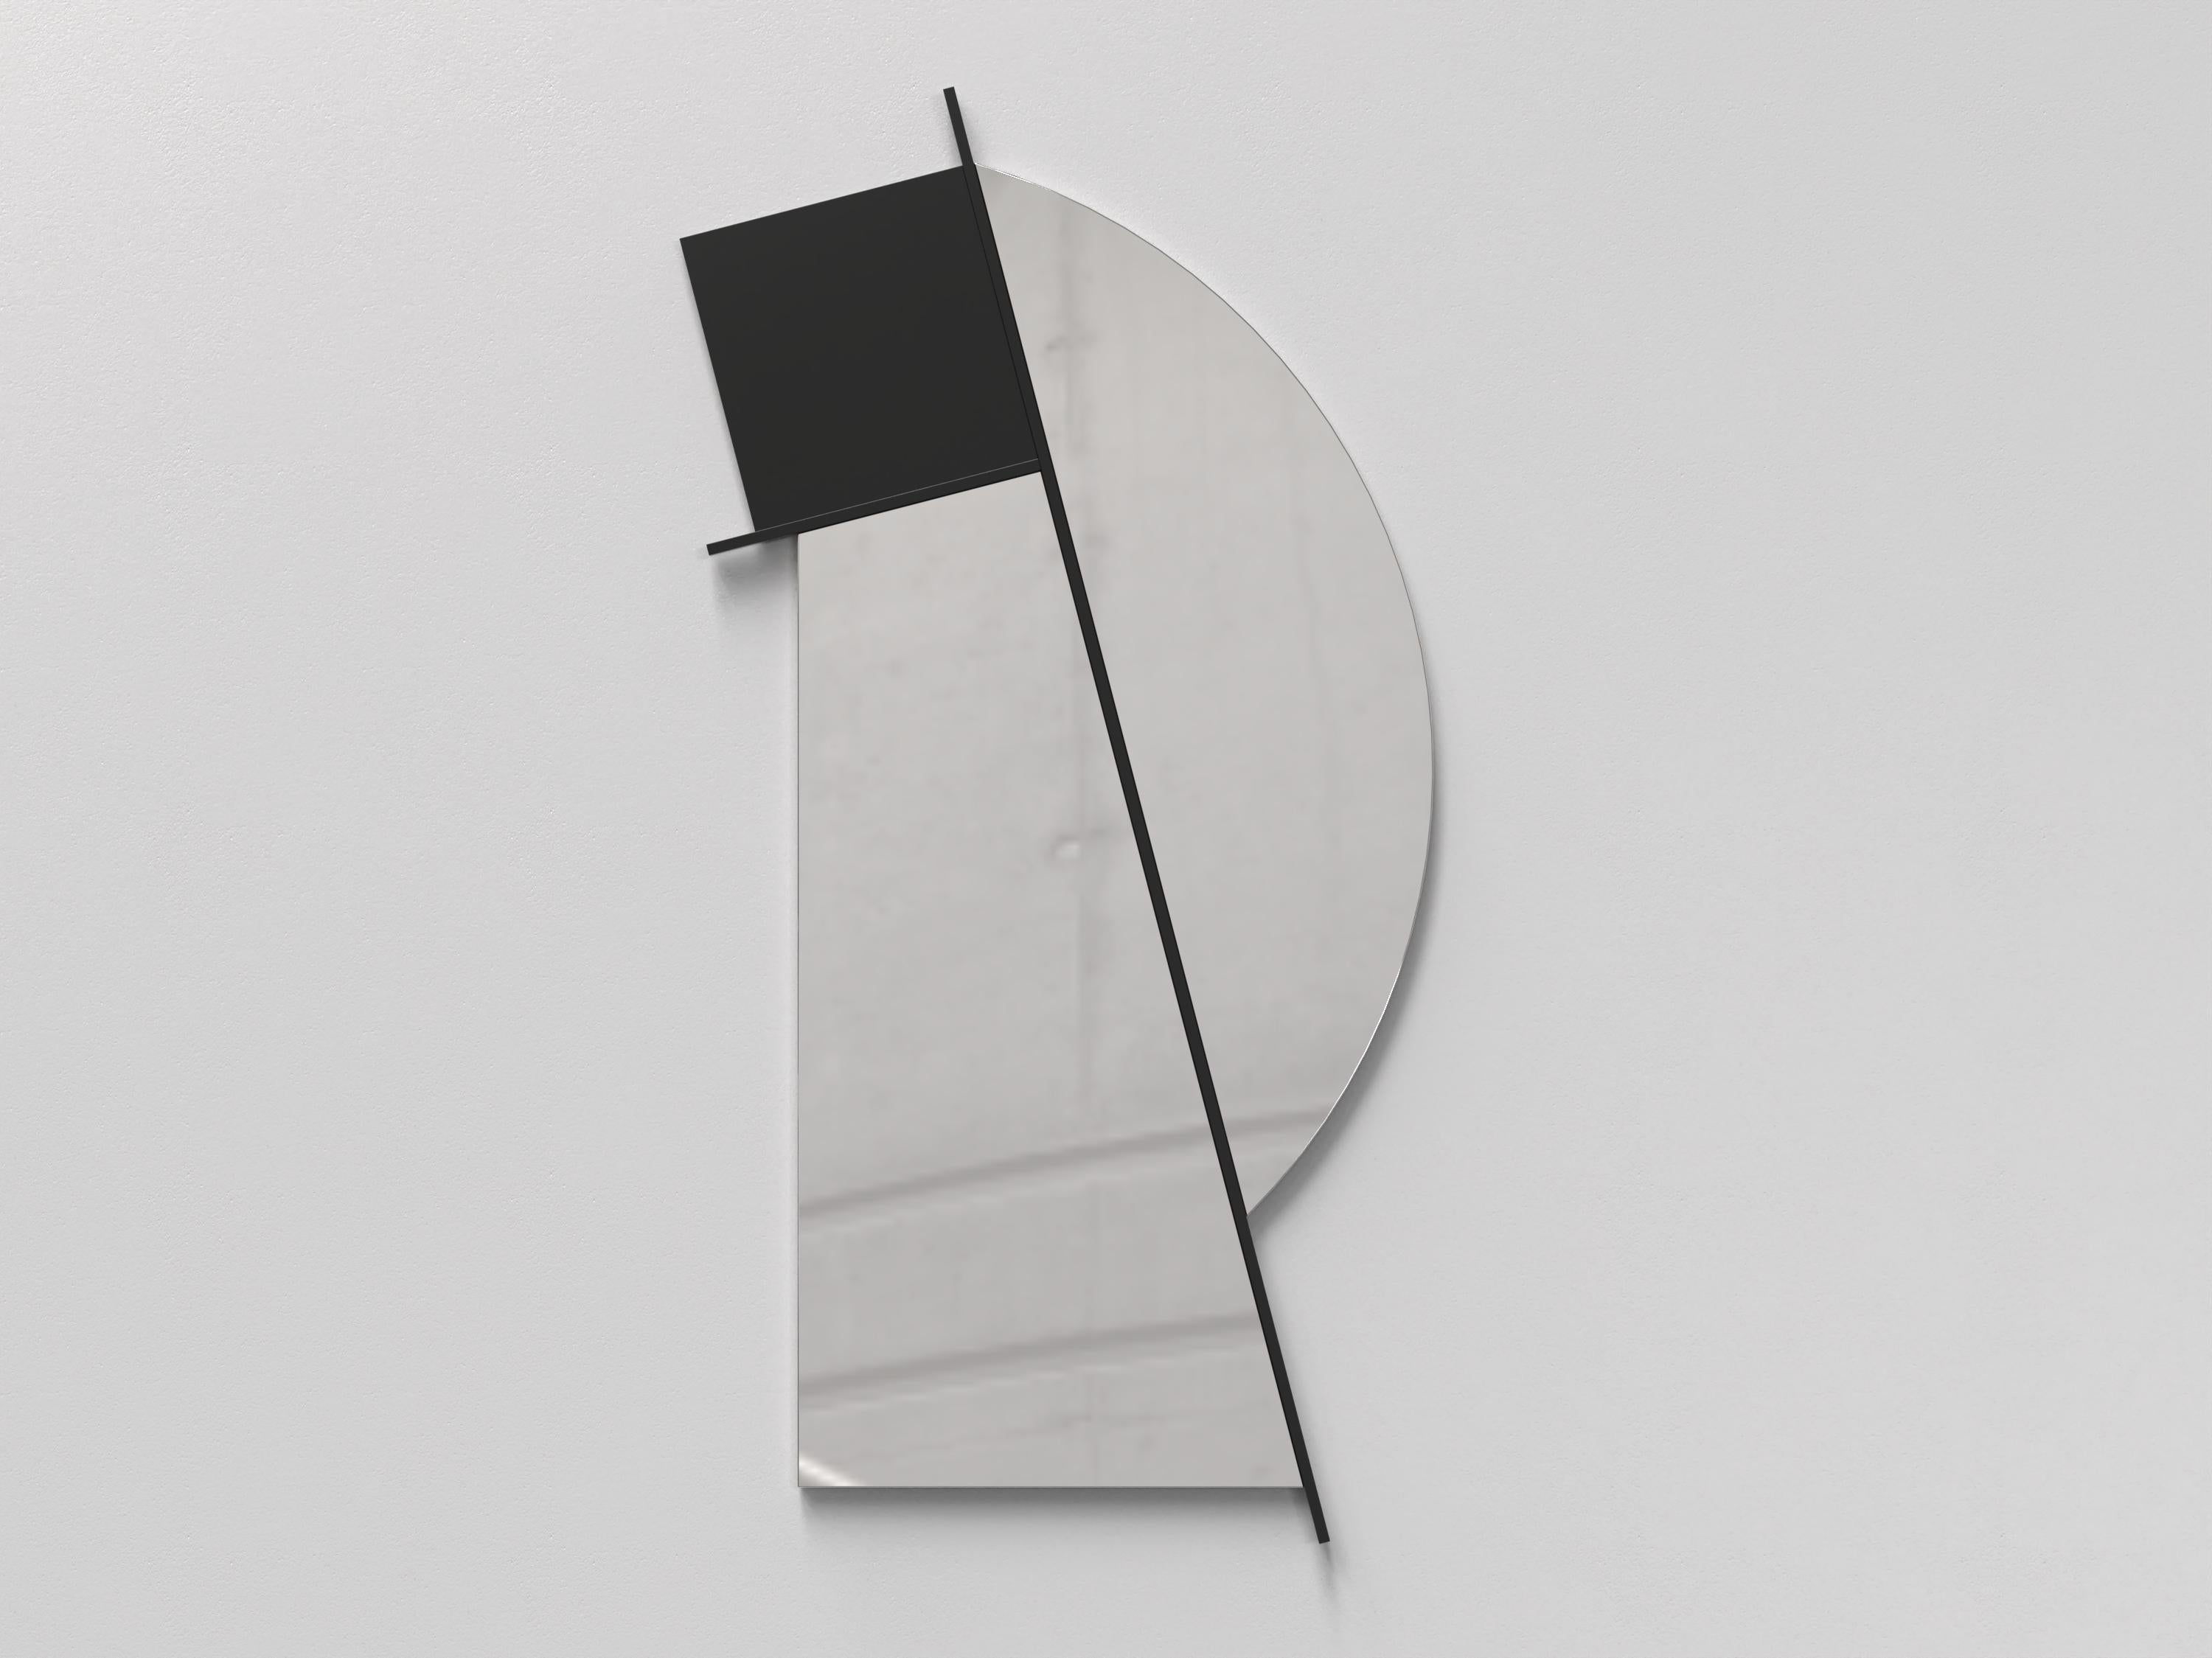 Nova V2 is a 21st Century mirror made by Italian artisans in painted metal. The piece is manufactured in a limited edition of 1000 signed and progressively numbered examples. It is part of the collectible design language Nova that has been developed